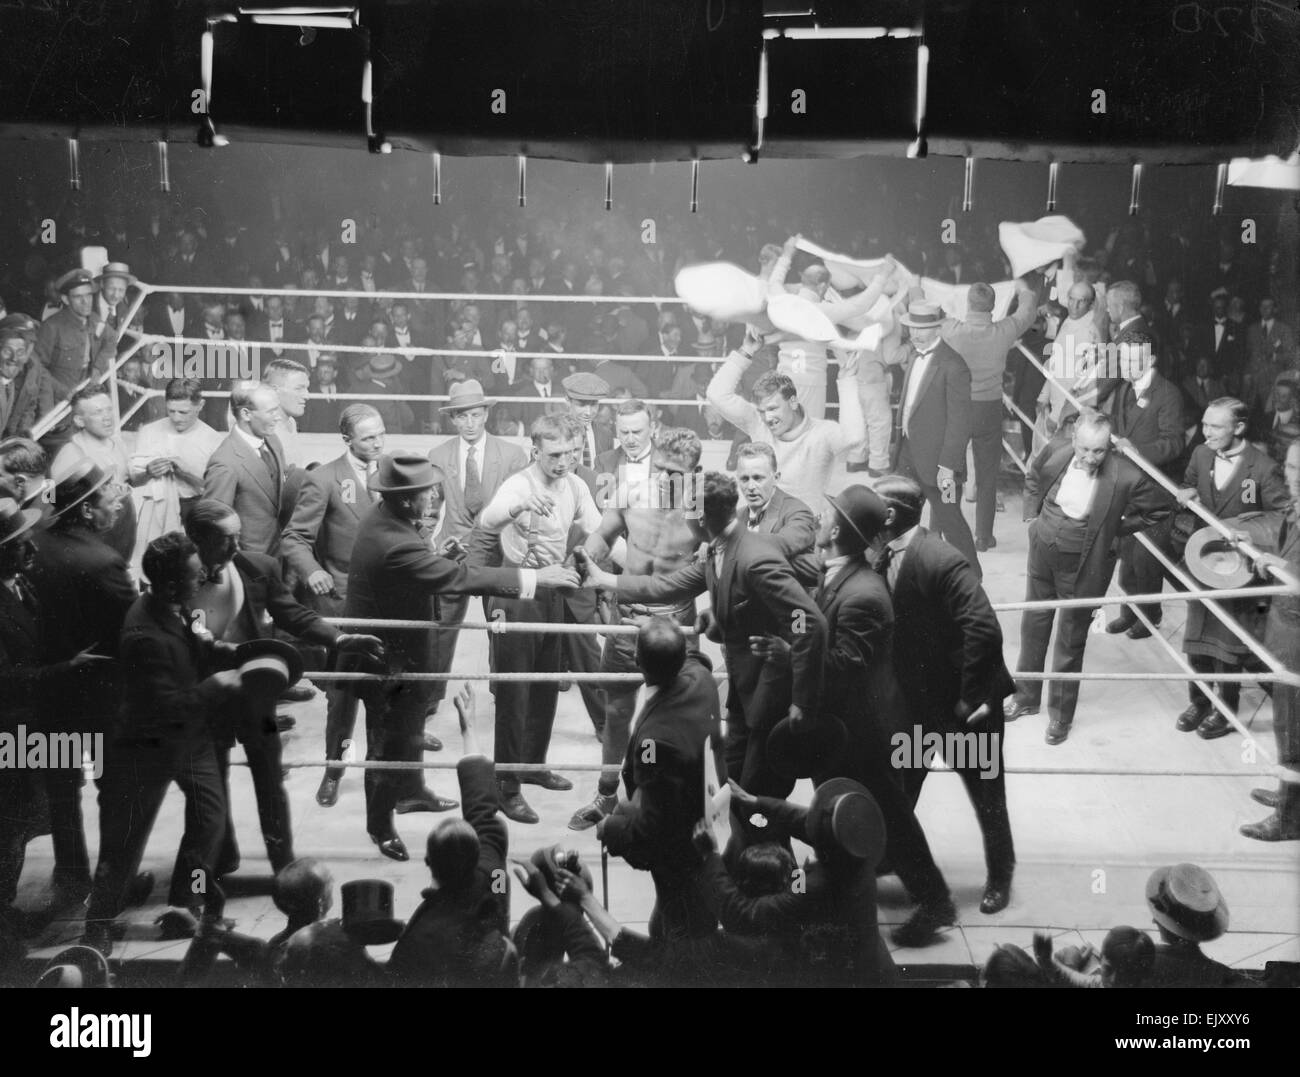 Joe Beckett celebrates with his supporters after knocking out Frank Goddard in the British Boxing Board of Control  British heavyweight title fight, at Olympia, Kensington, London, United Kingdom 17th June 1919 Stock Photo